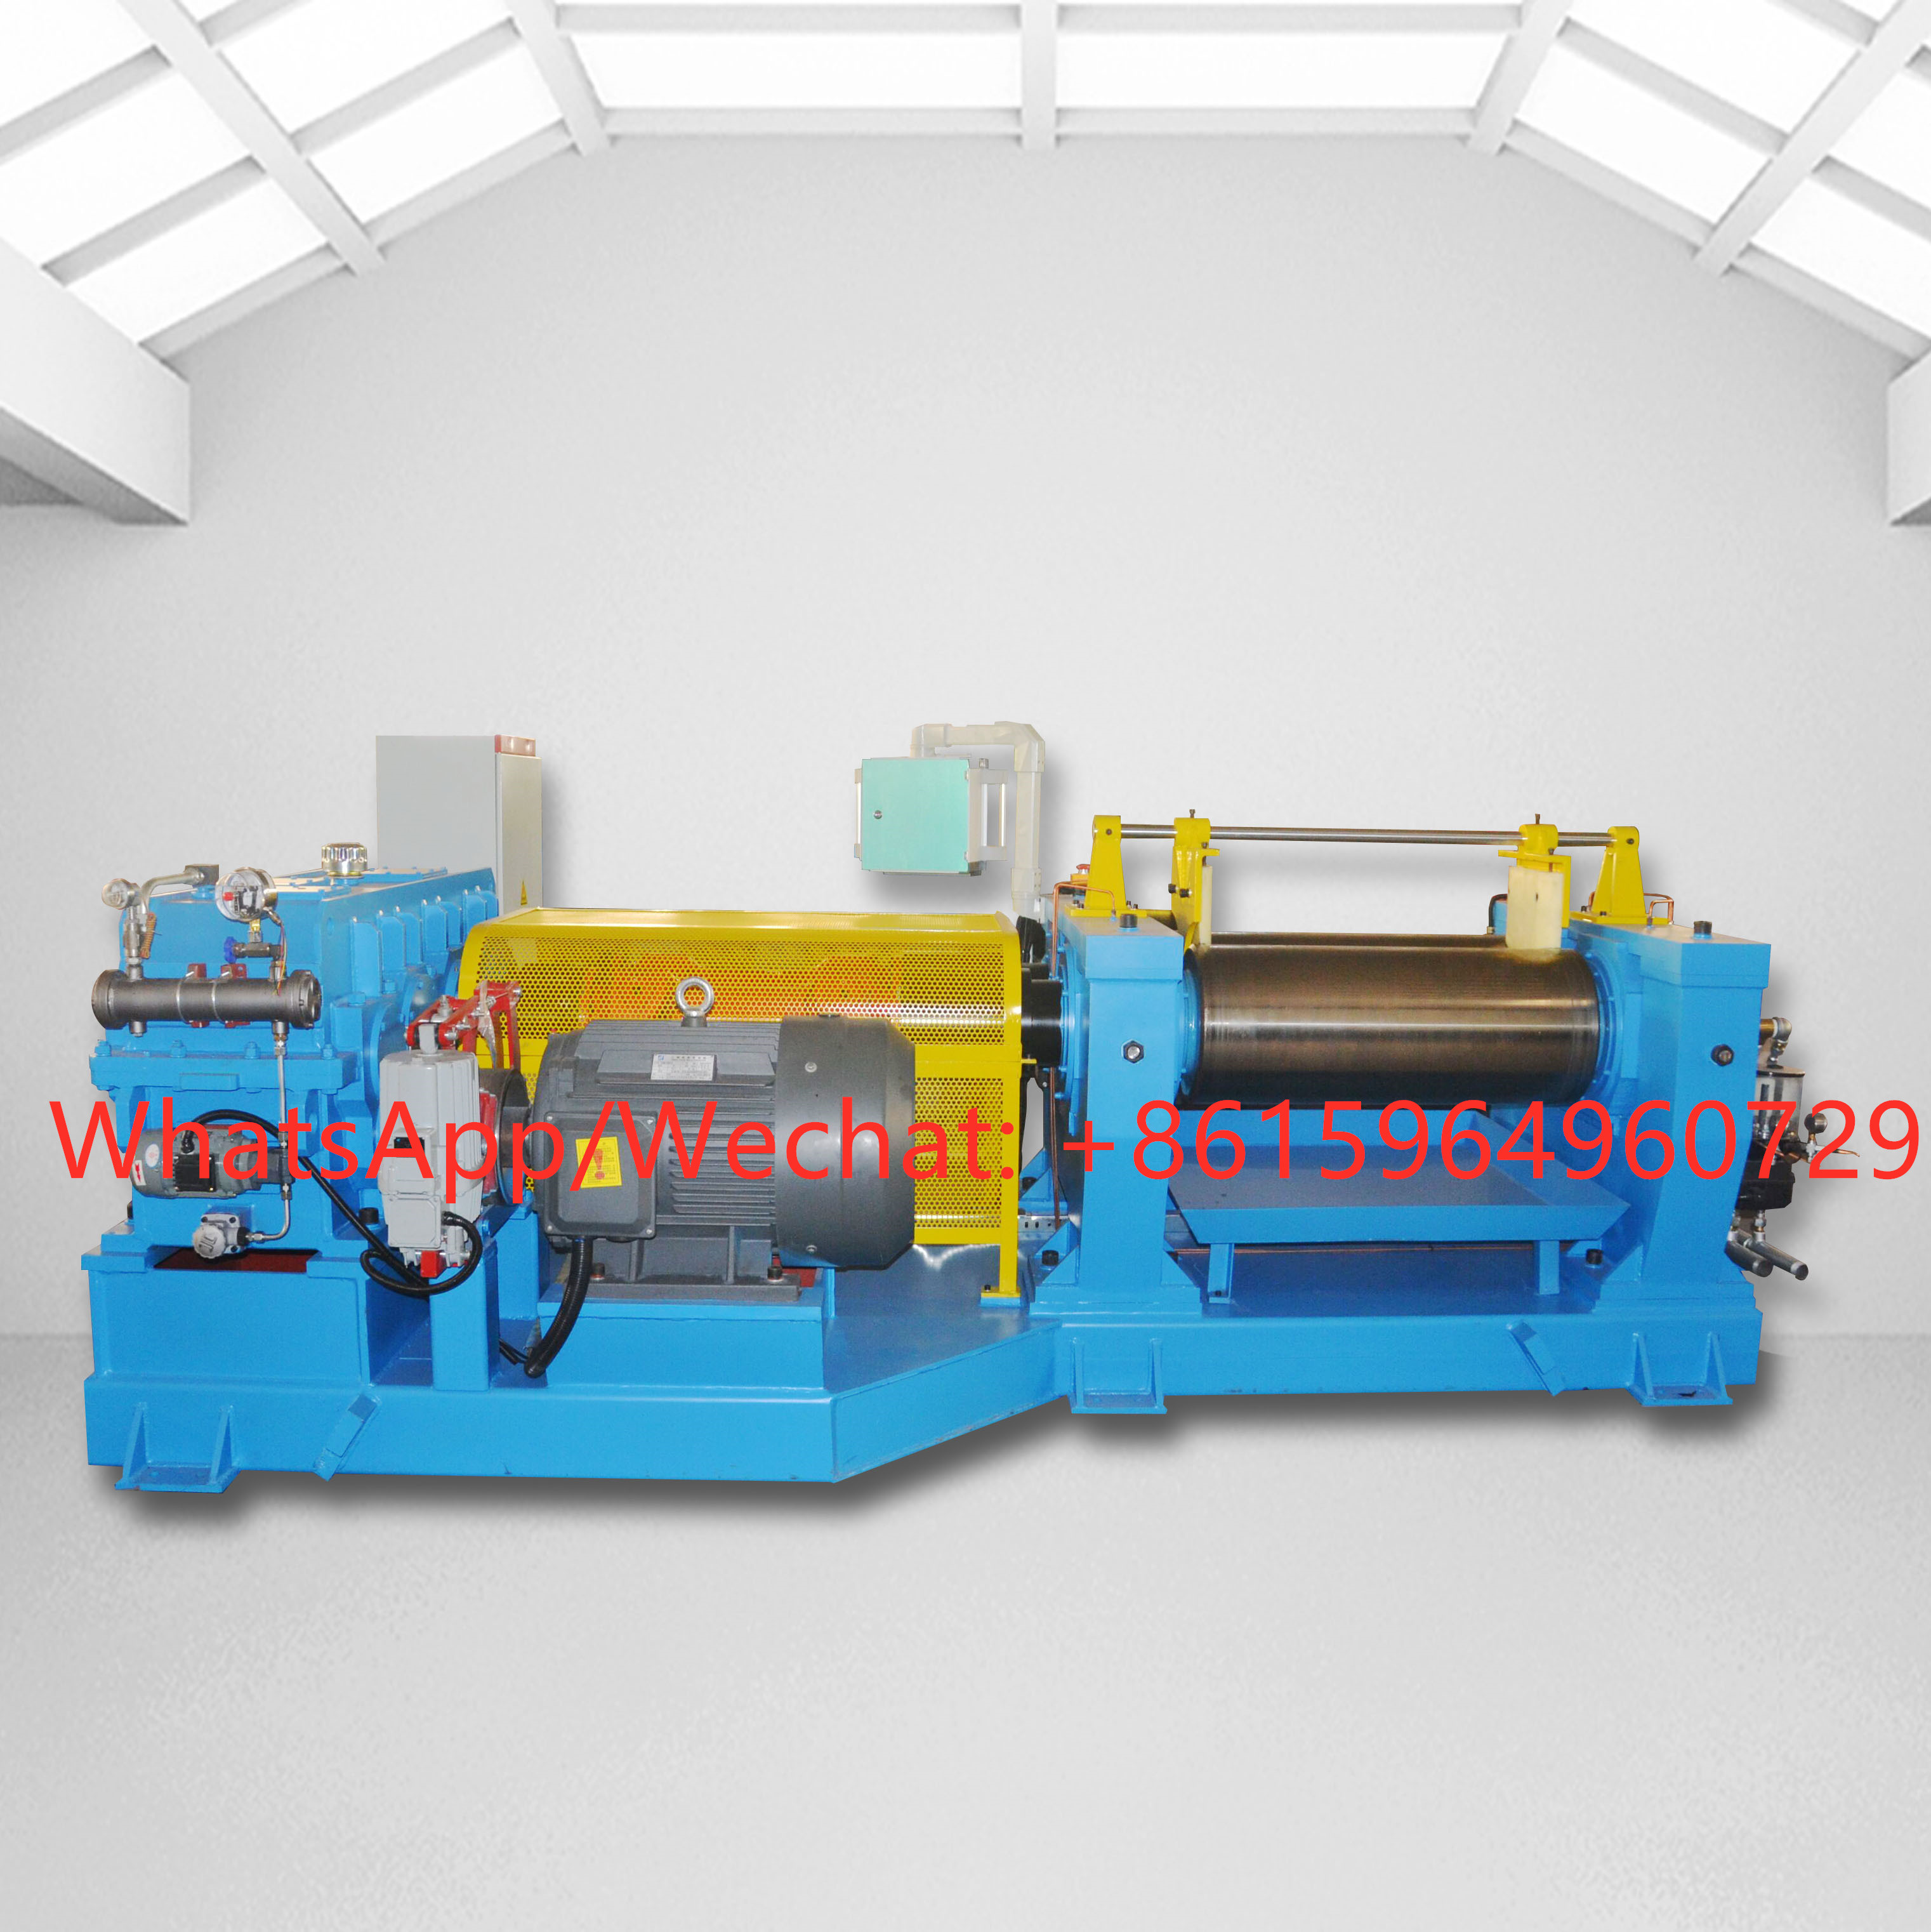  Double output open/rubber mixing mill/machine Manufactures